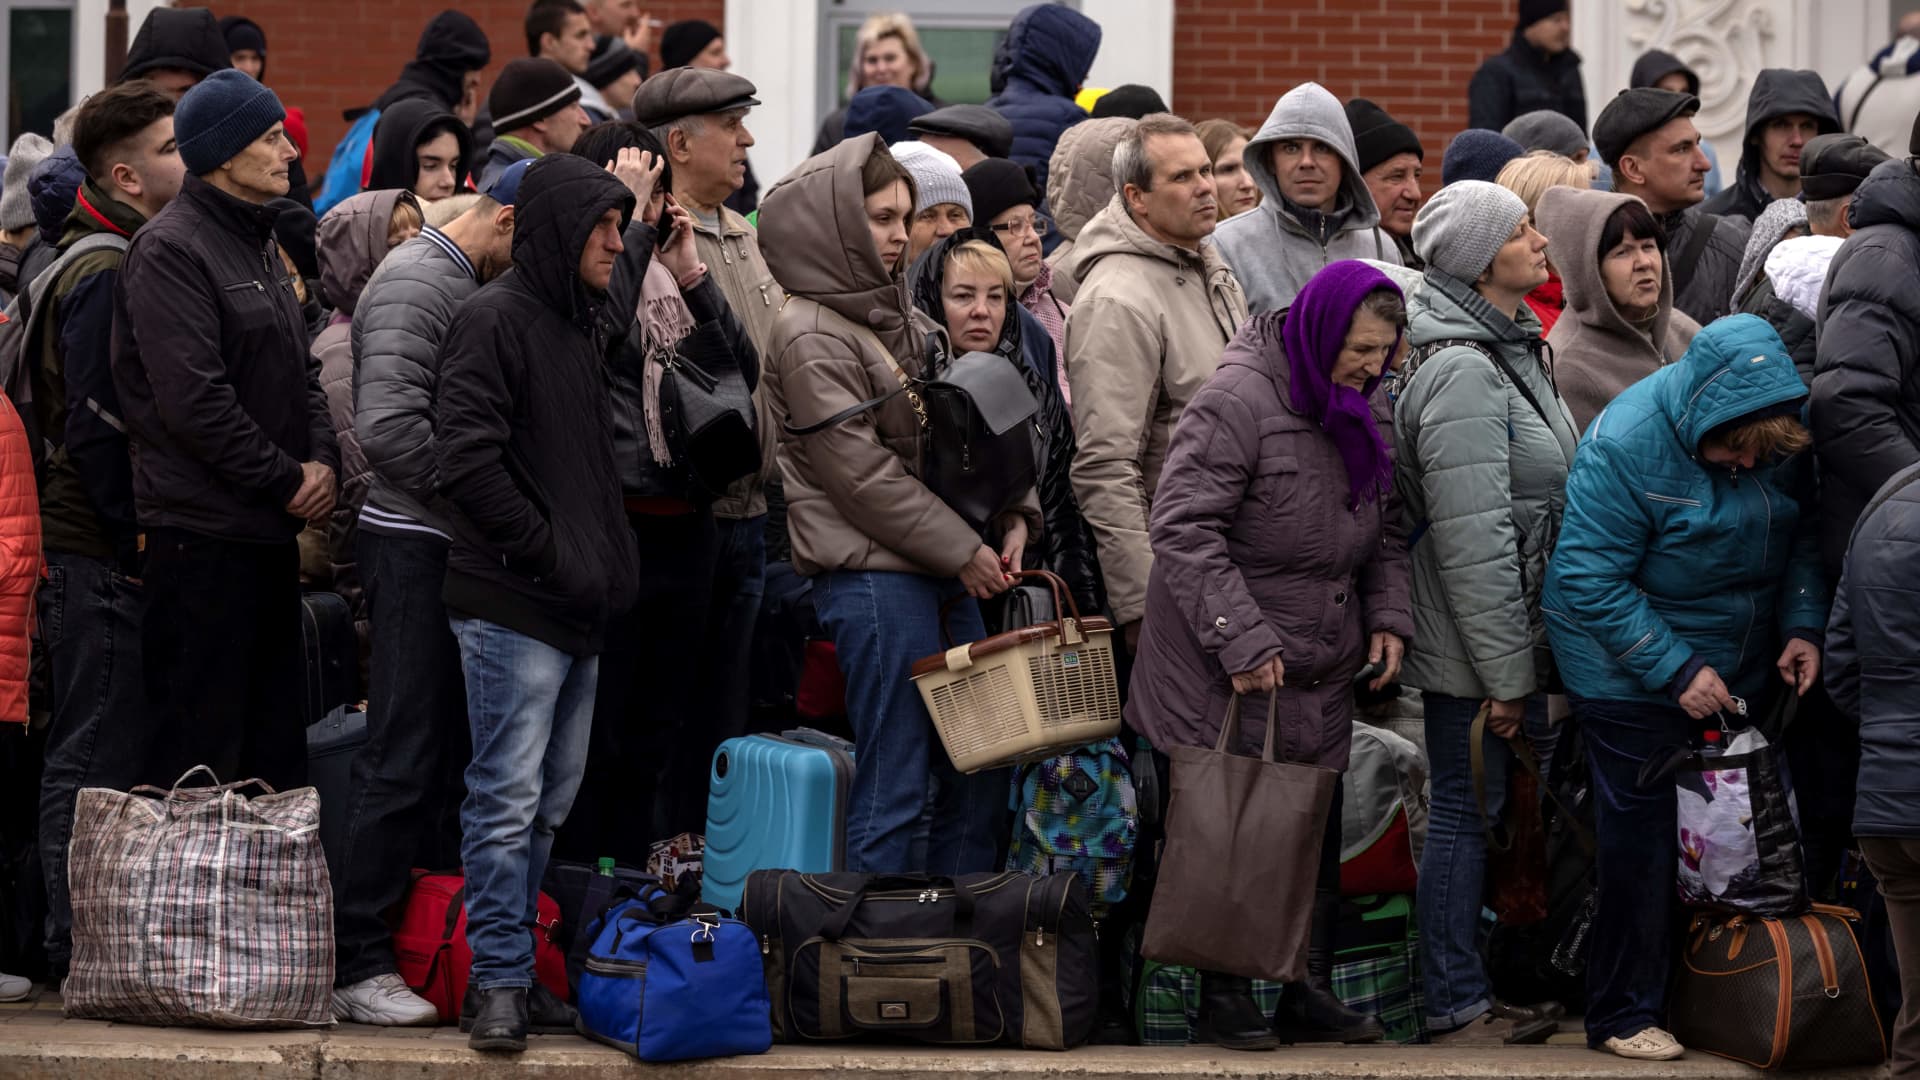 Families hold bags as they wait to board a train at Kramatorsk central station as they flee the eastern city of Kramatorsk, in the Donbass region on April 5, 2022.